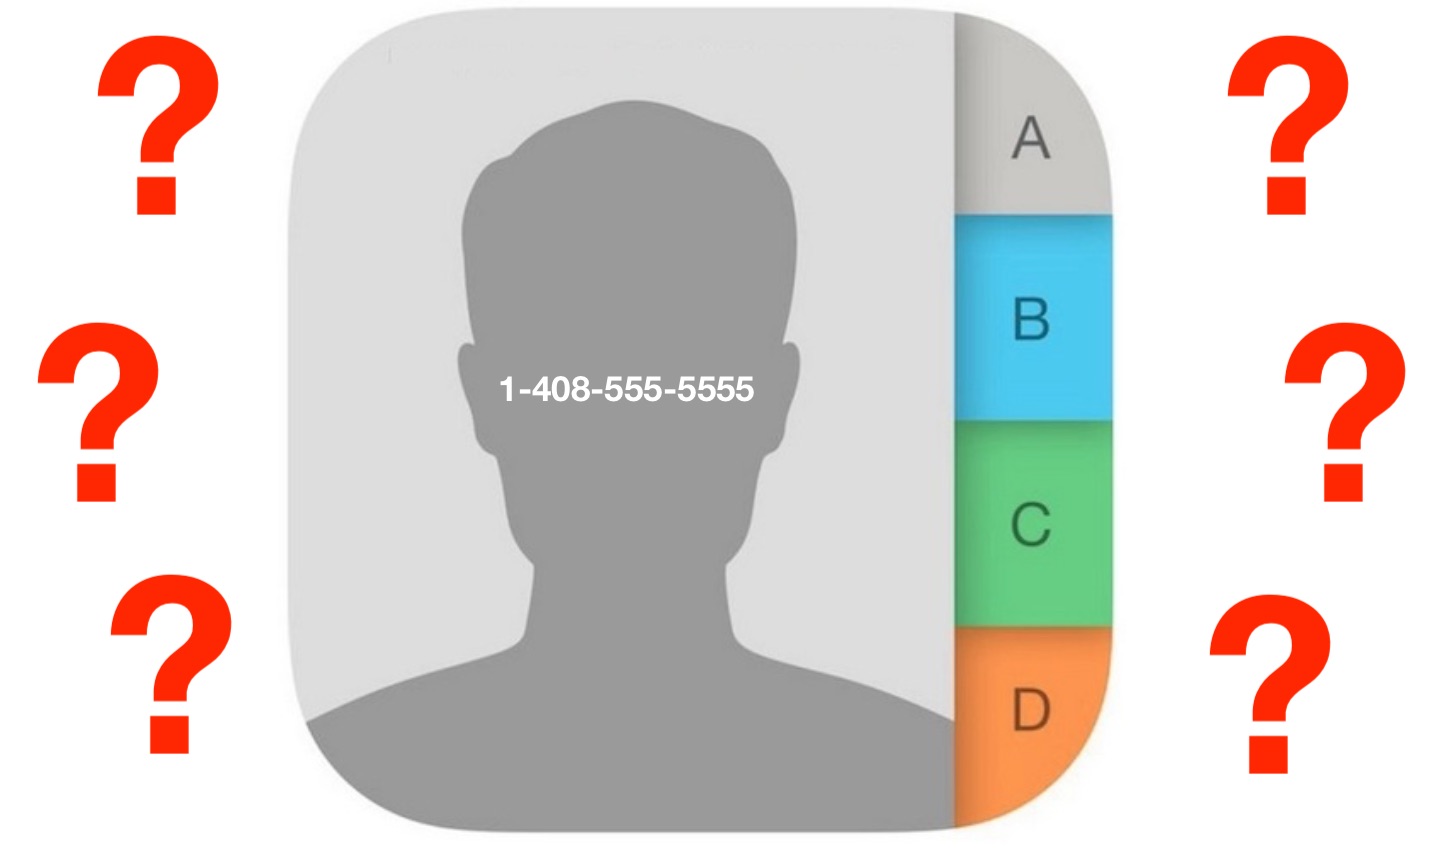 Contacts Showing as Numbers Only on iPhone? Here’s the Fix for Not Showing Contact Names!